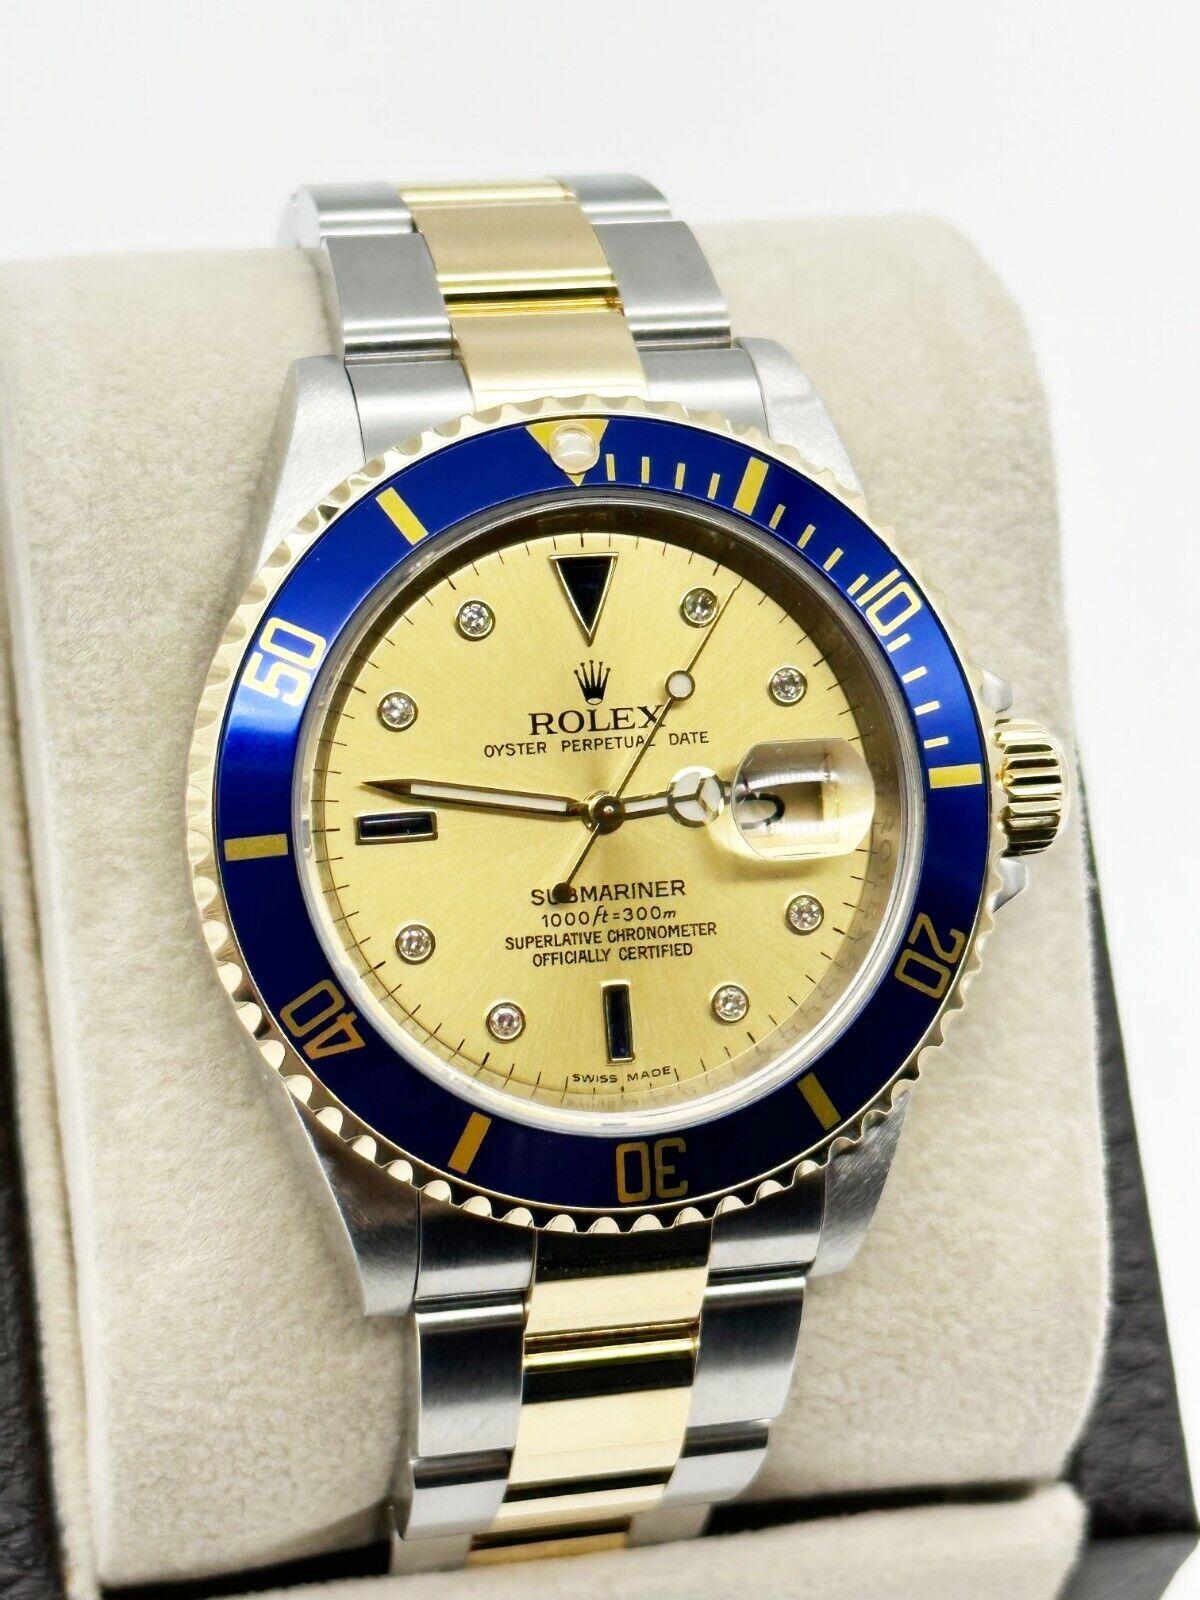 Style Number: 16613
 
Serial: Z990***

Year: 2006
 
Model: Submariner
 
Case Material: Stainless Steel 
 
Band: 18K Yellow Gold & Stainless Steel 
 
Bezel: 18K Yellow Gold
 
Dial: Original Champagne Serti Dial with Diamonds and Sapphires 
 
Face: